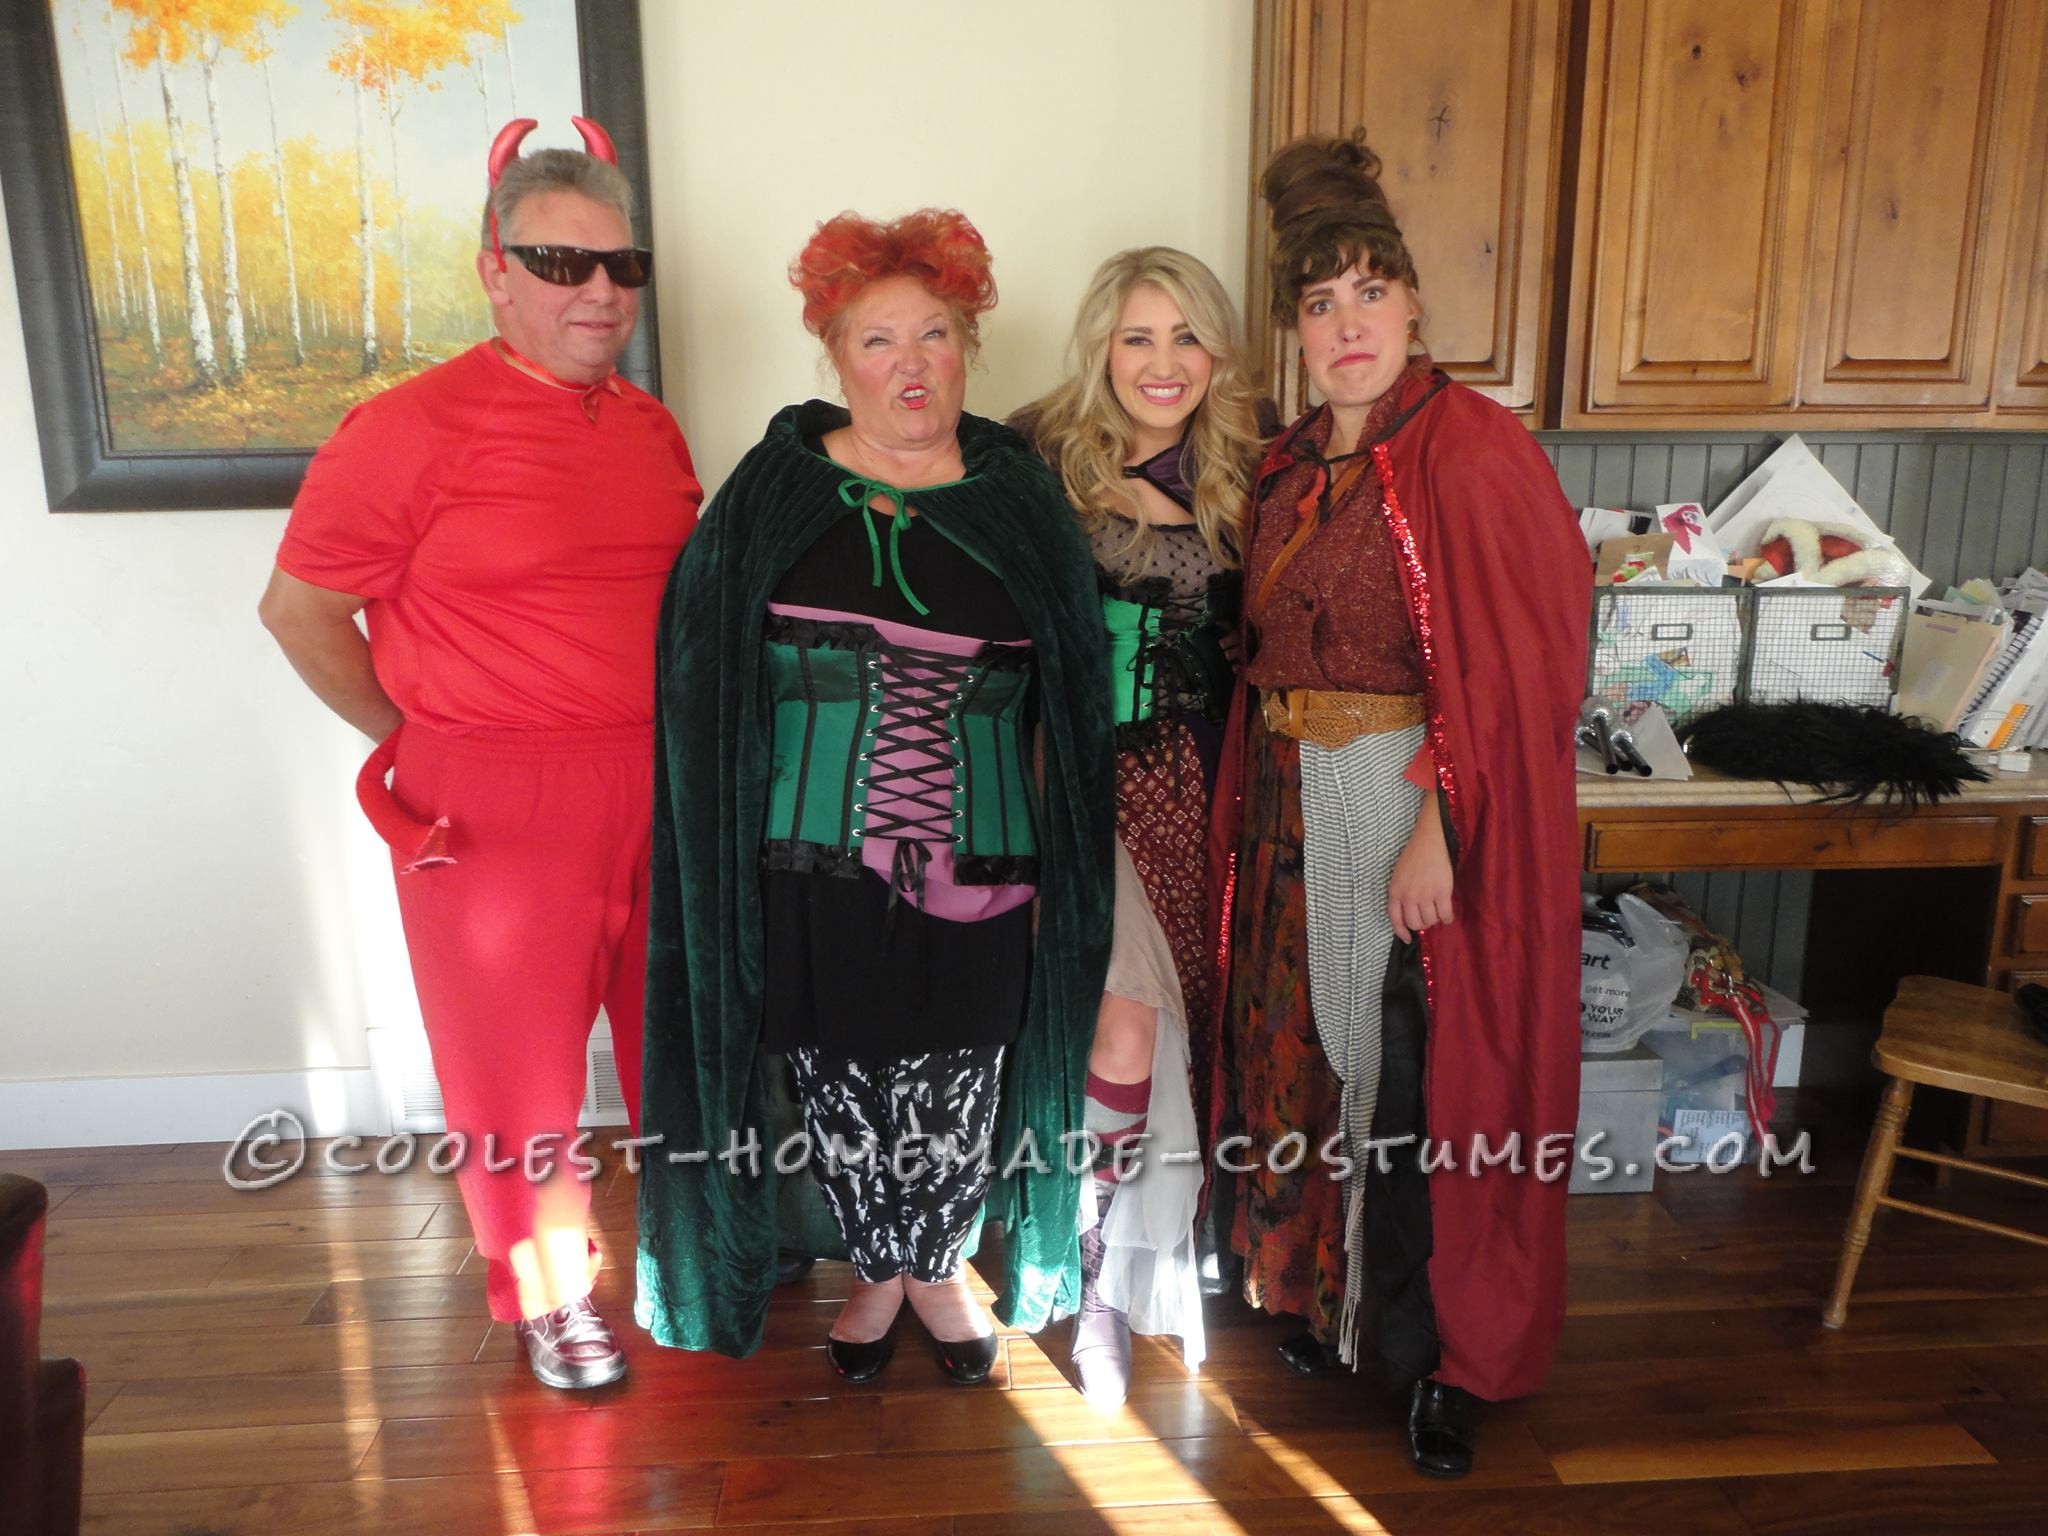 The Sanderson Sisters and the Master Group Costume from Hocus Pocus